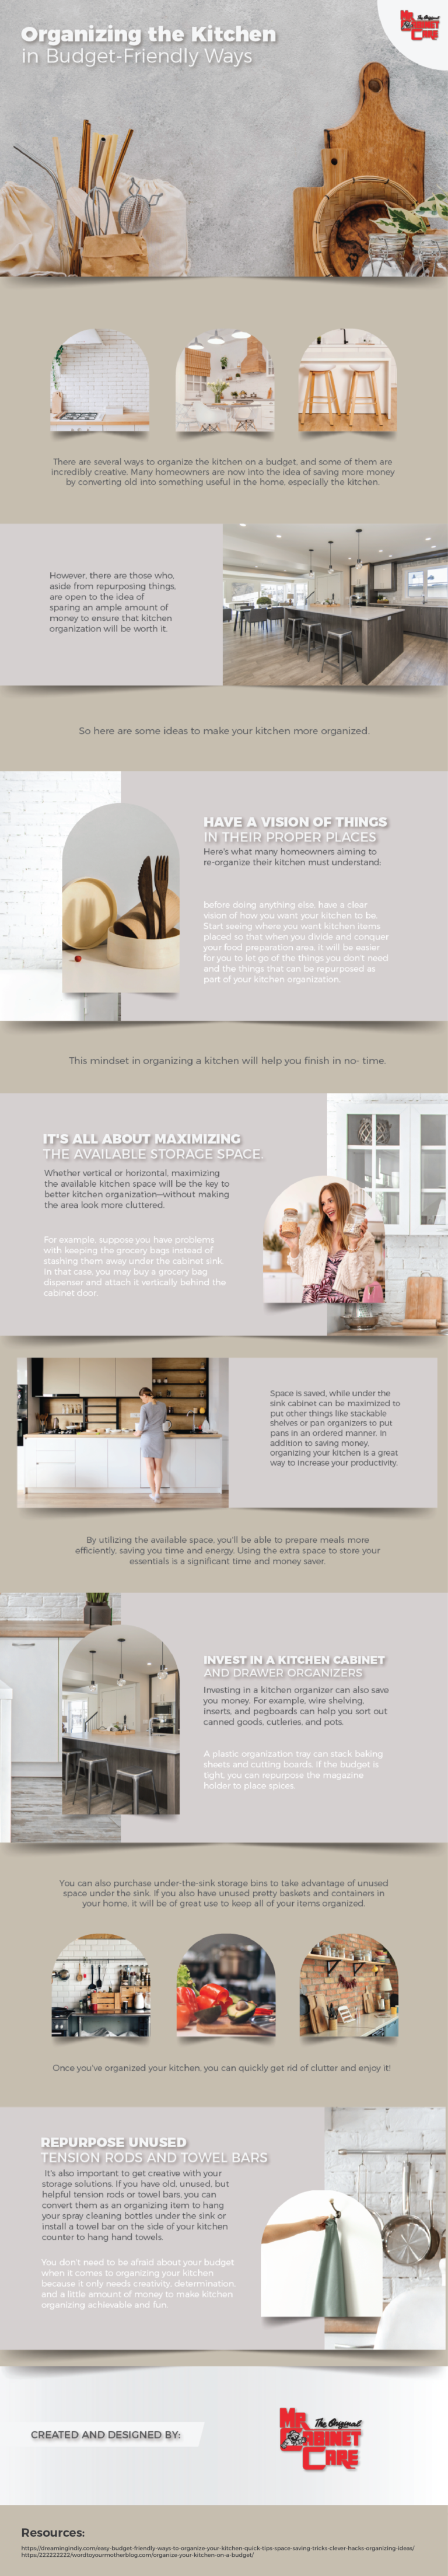 Organizing the Kitchen in Budget-Friendly Ways ( Infographic)